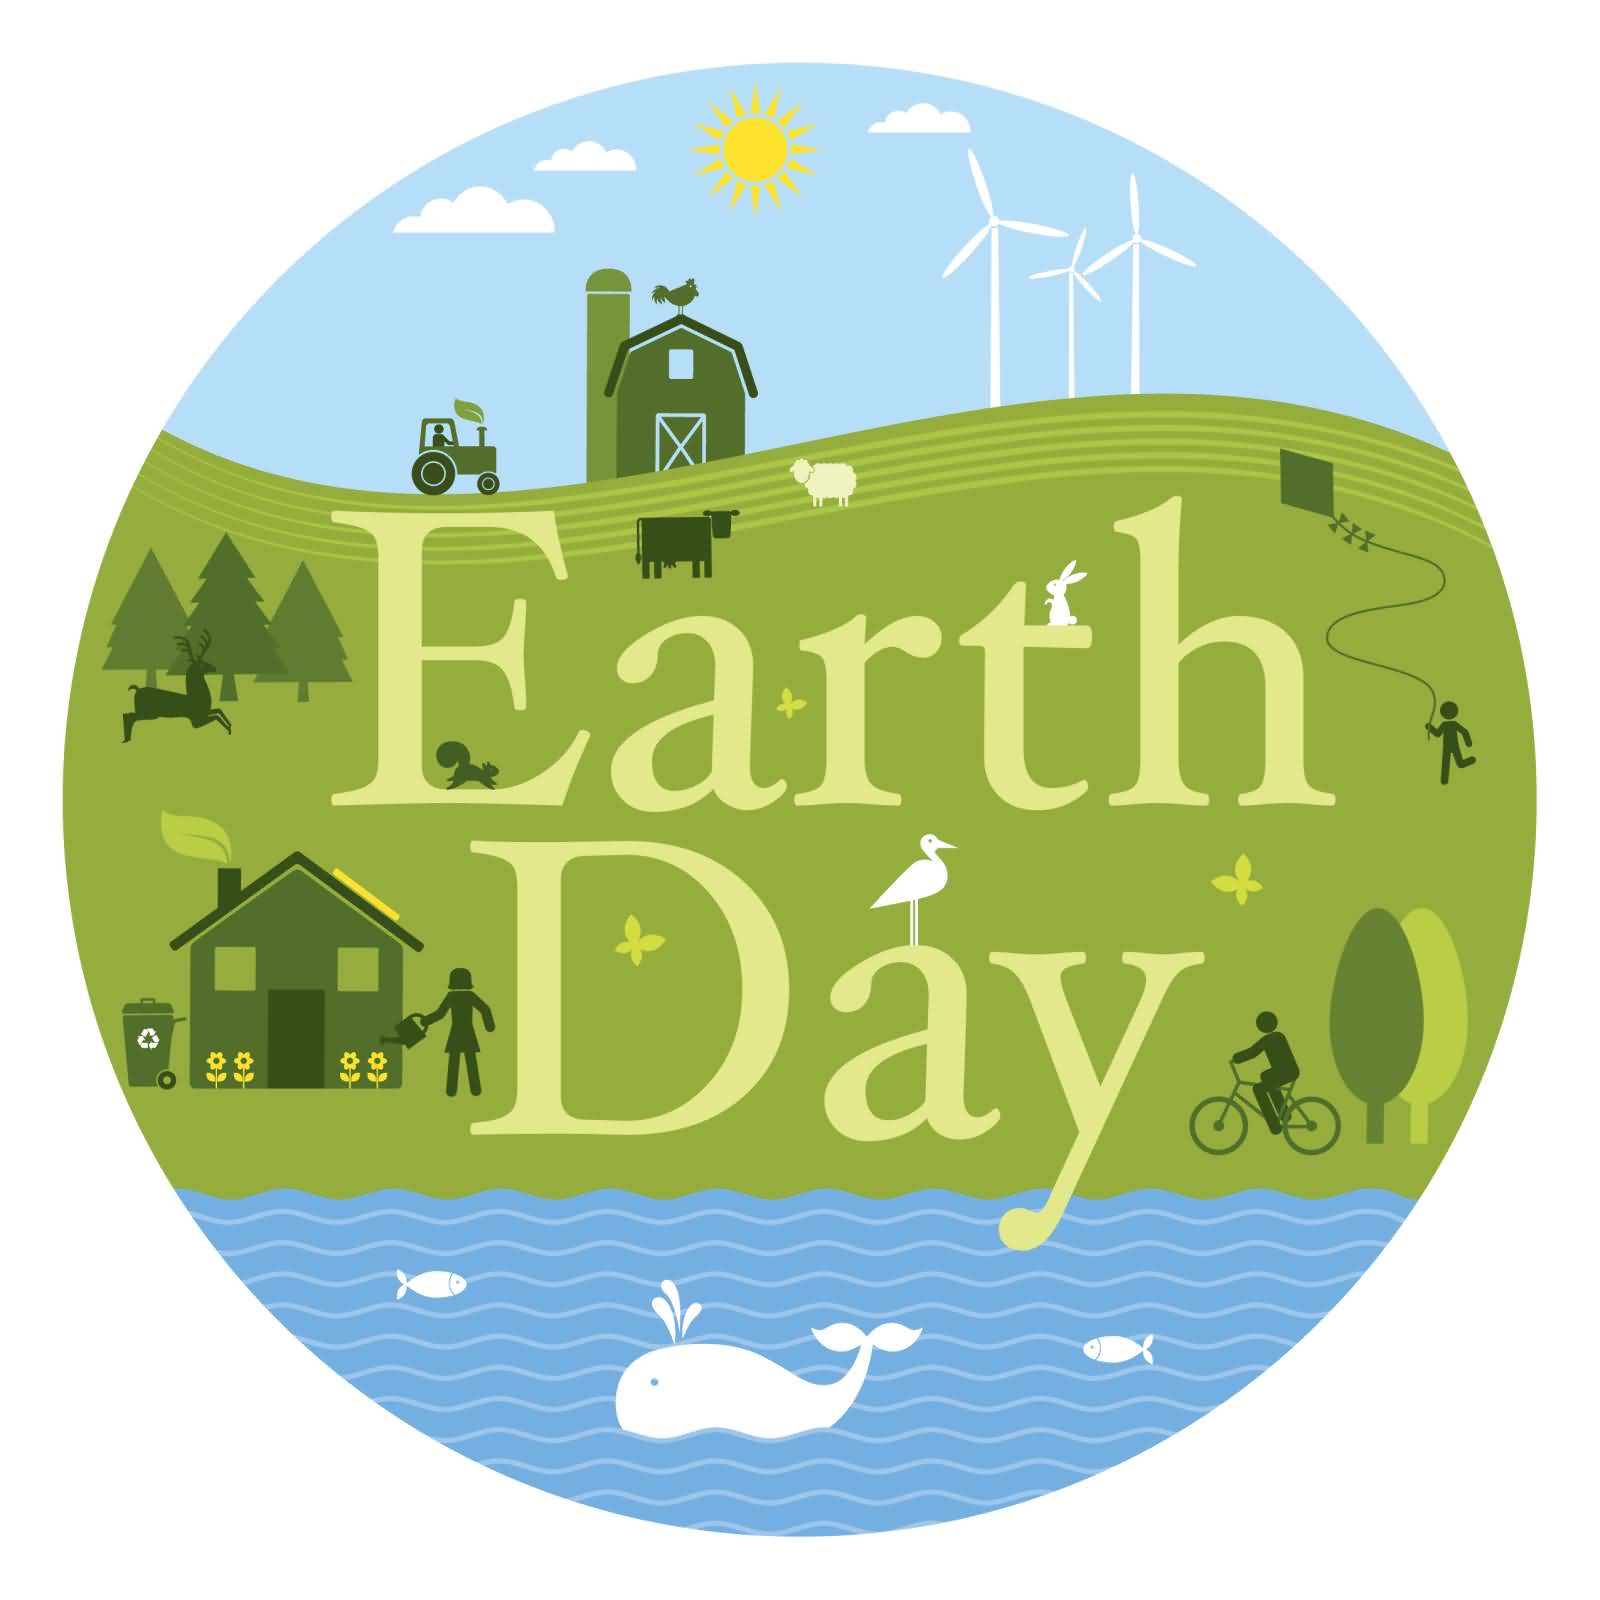 55 Best Earth Day 2018 Wish Pictures And Photos